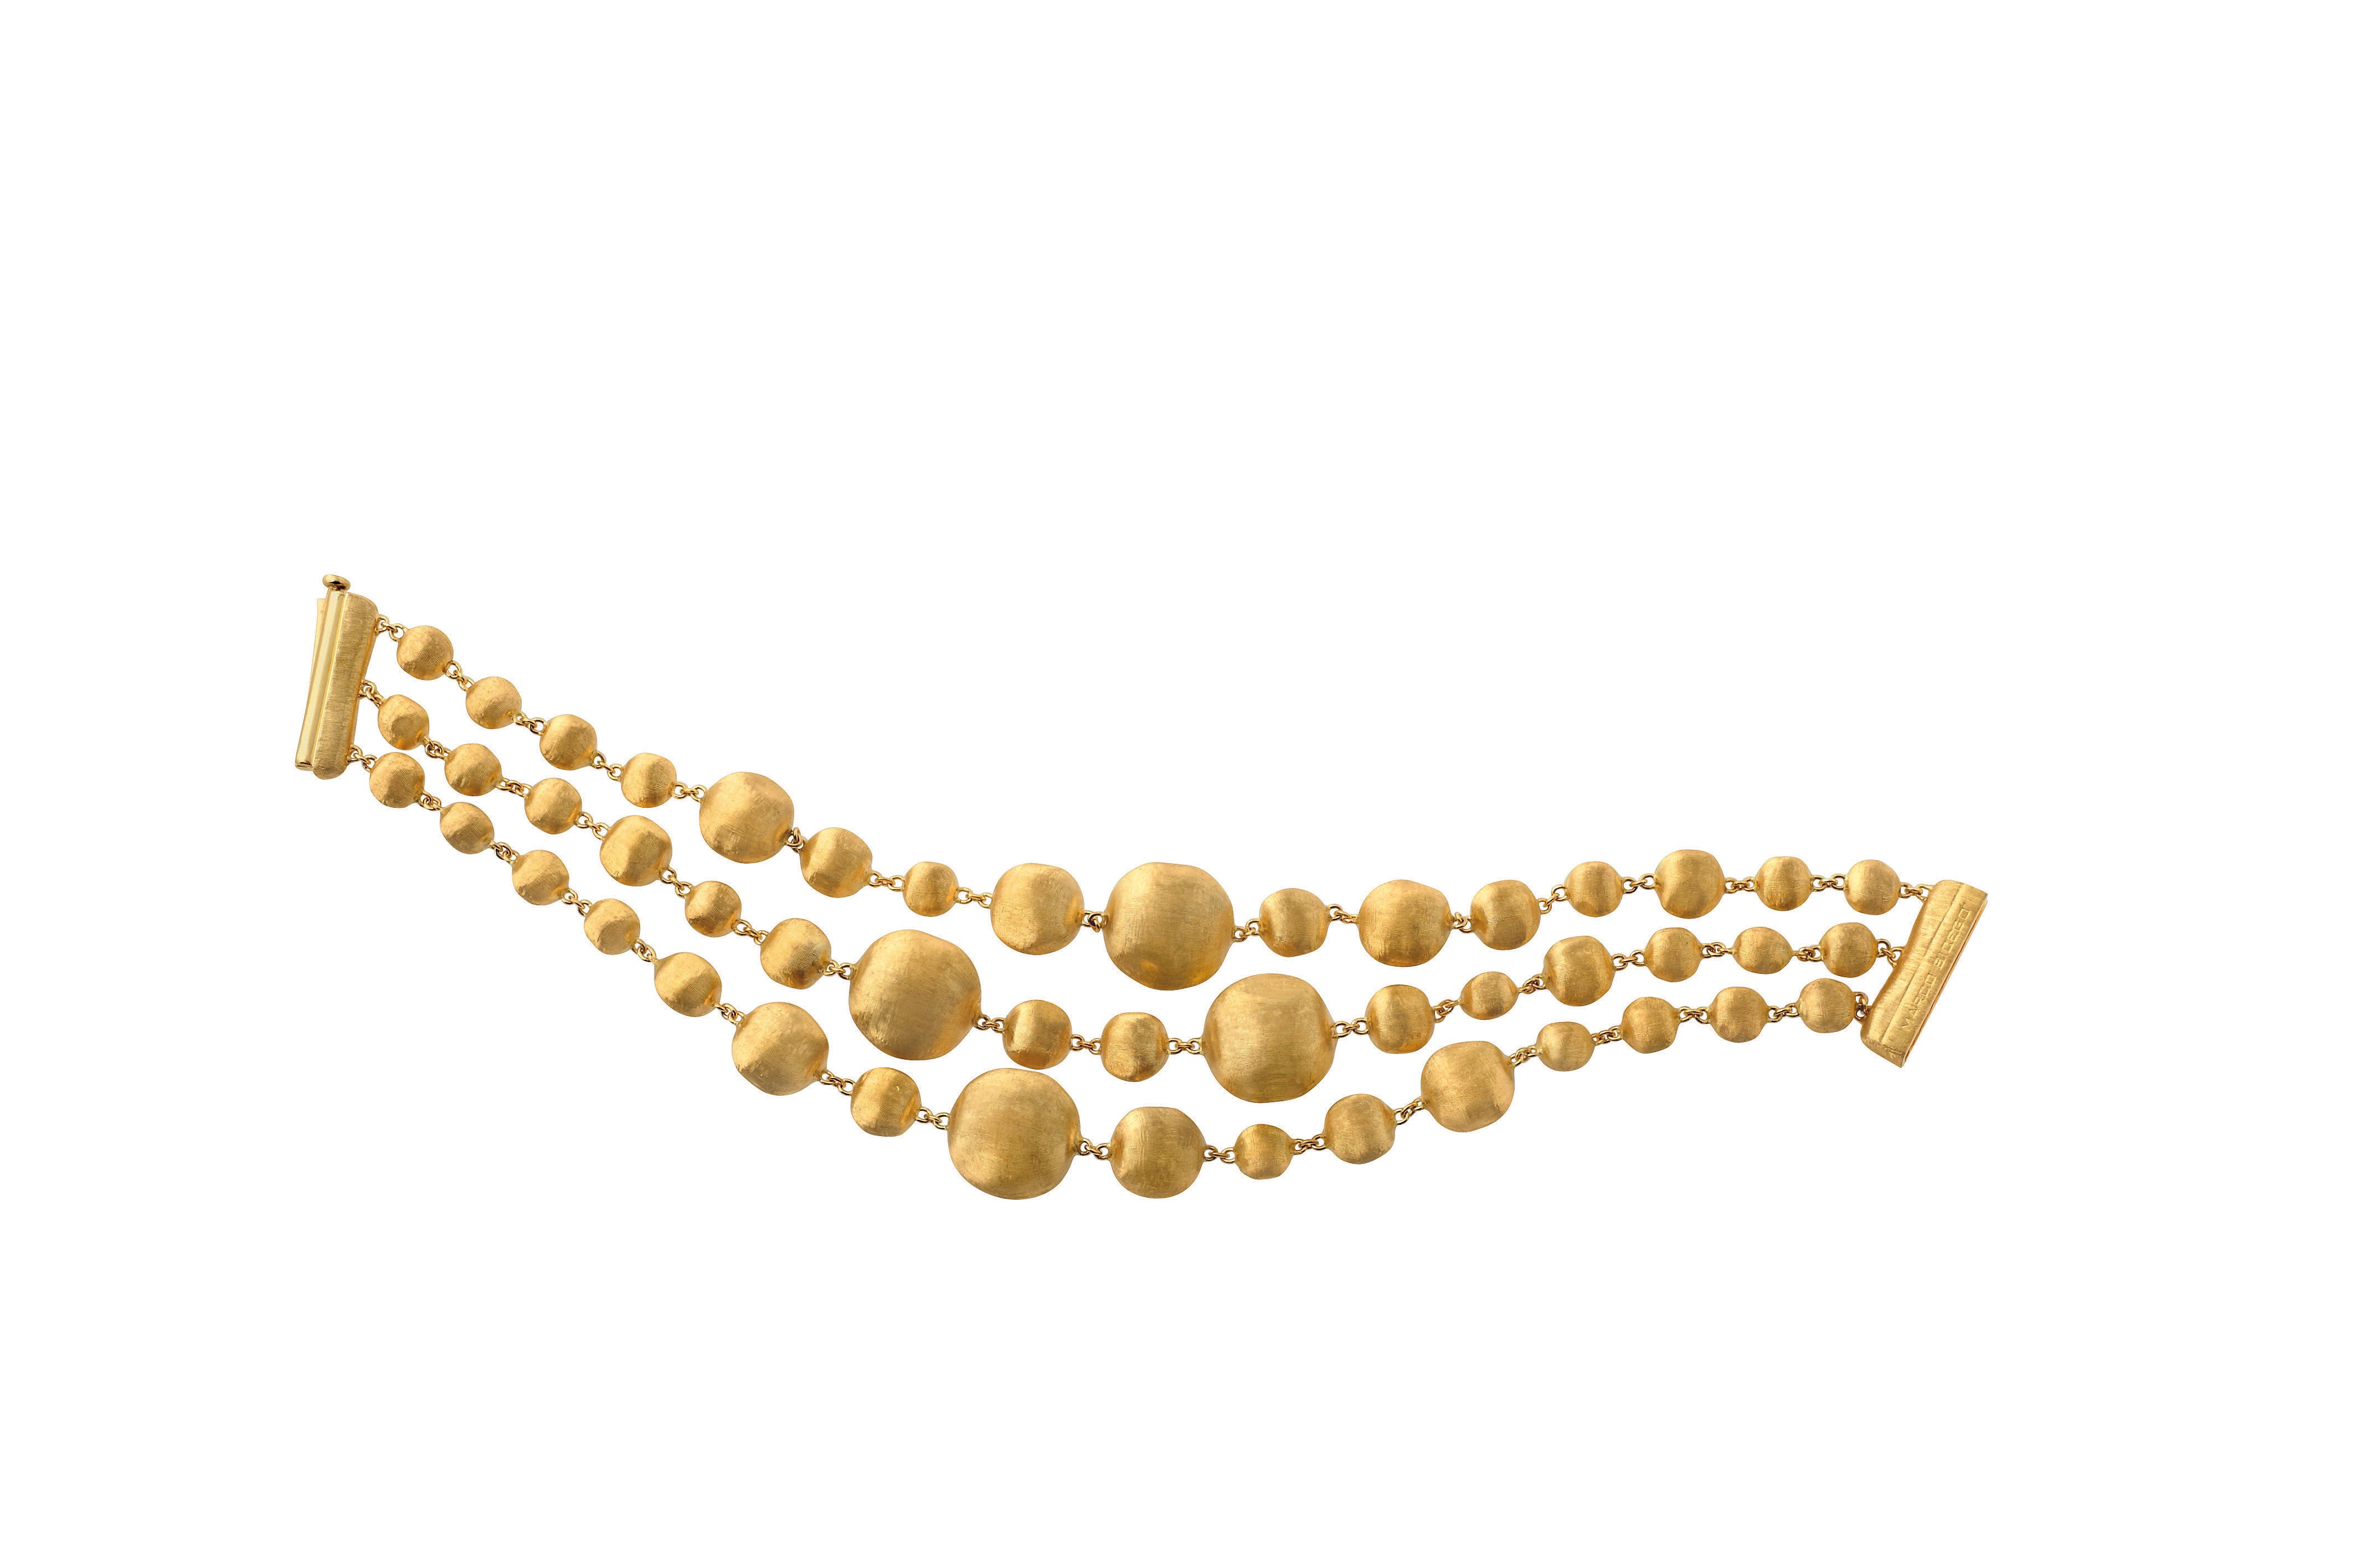 MARCO BICEGO 18K YELLOW GOLD 3 ROW BEADED BRACELET FROM THE AFRICA COLLECTION